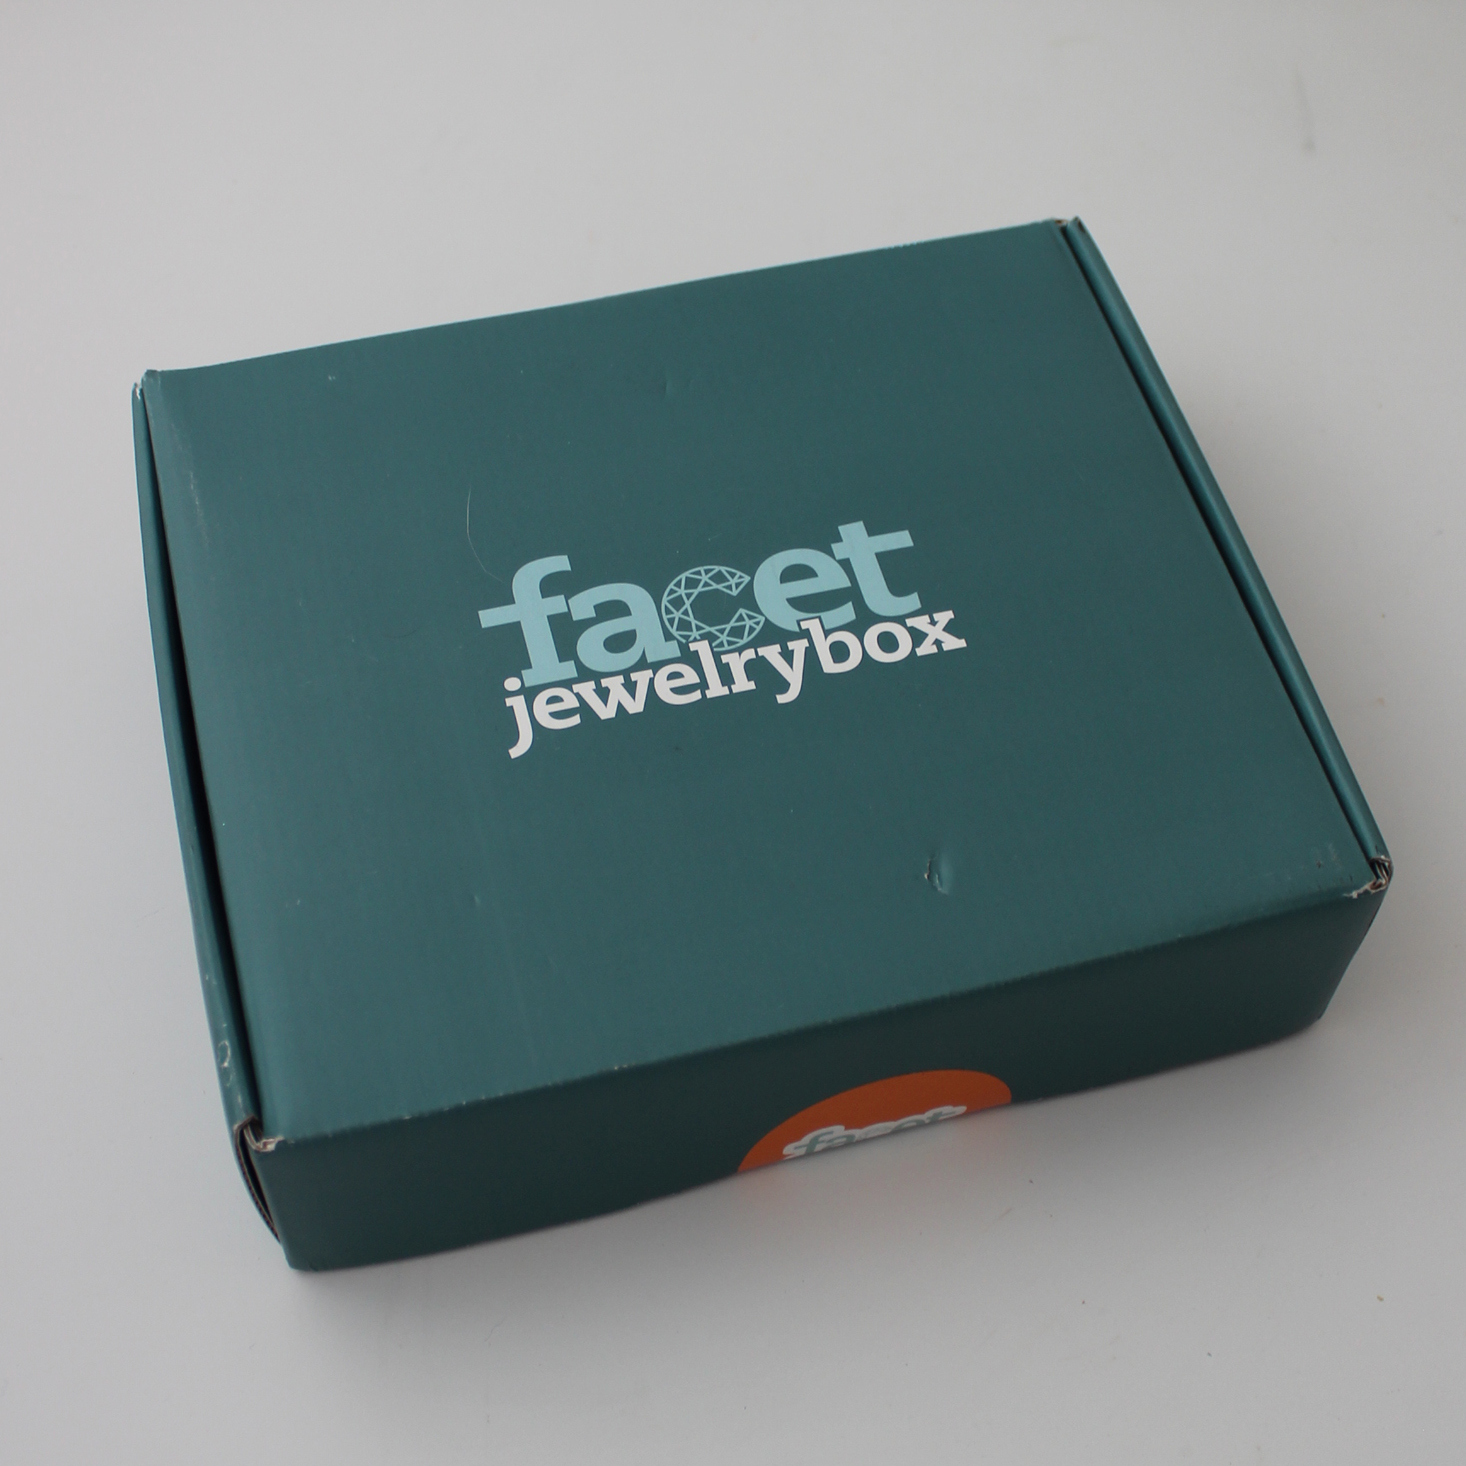 Facet Jewelry Box Bead Stitching Review + Coupon – October 2018